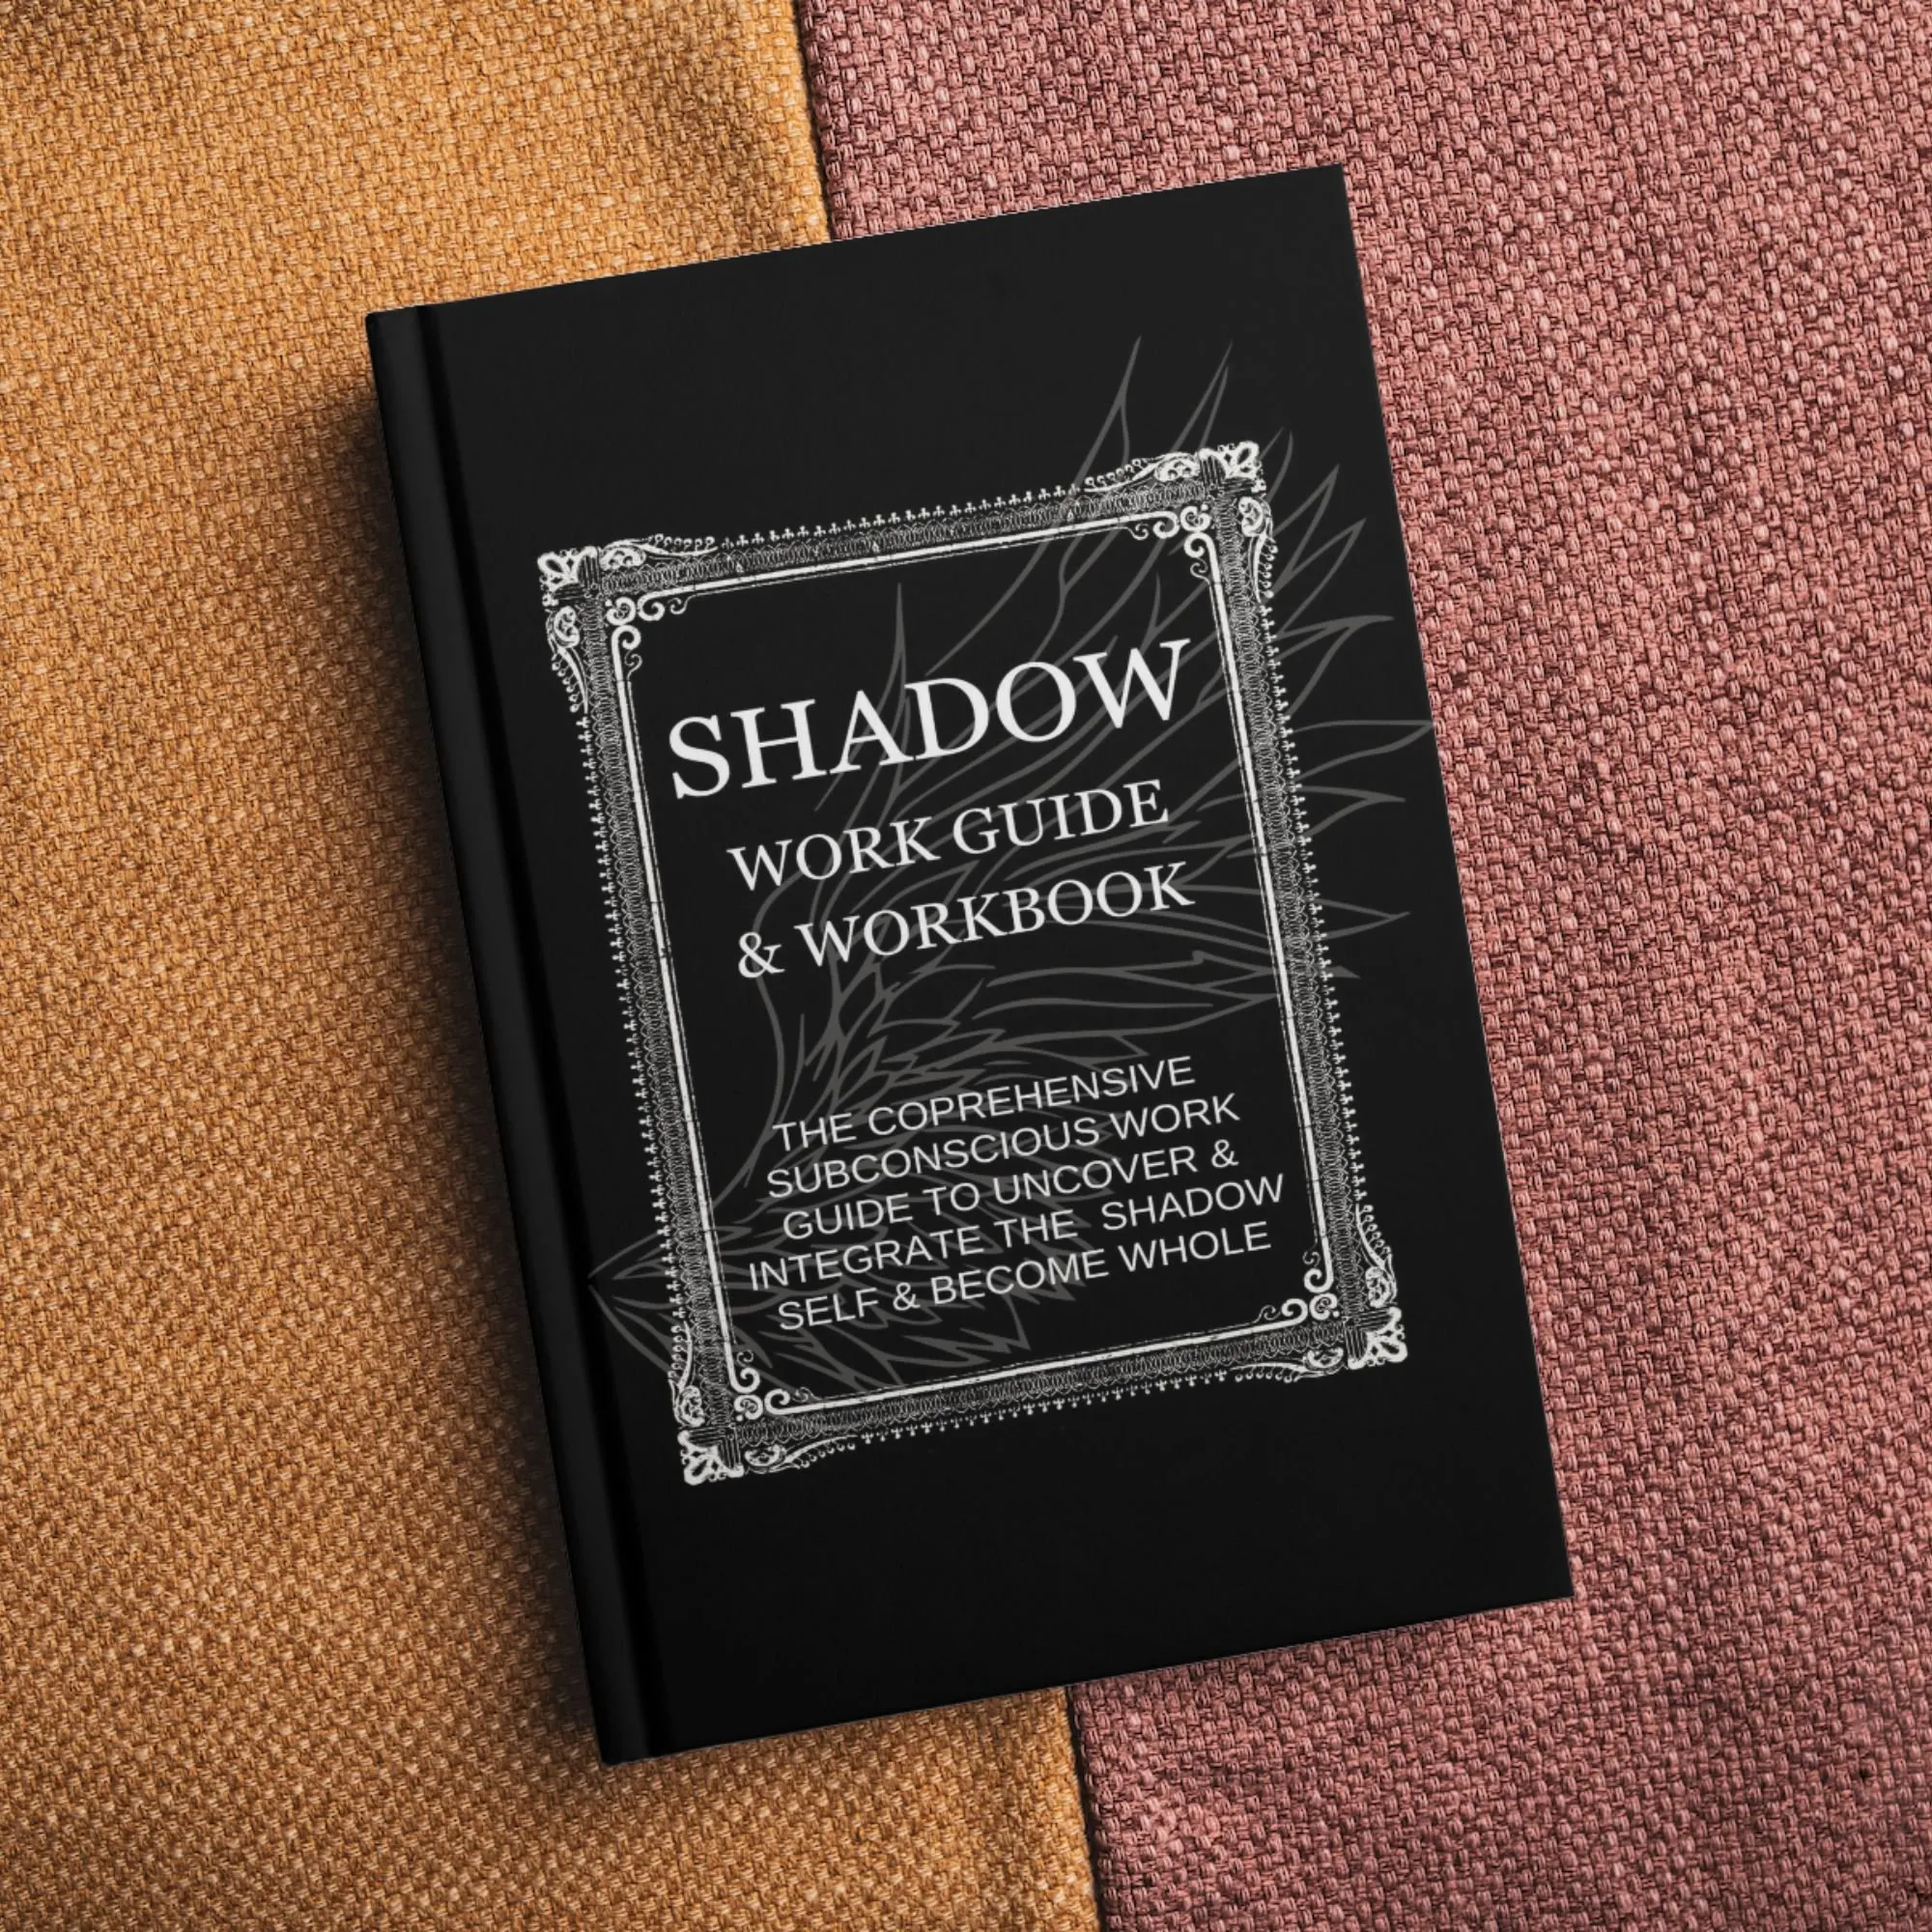 shadow work journal guide workbook cbt therapy worksheets inner child healing writing therapy prompts questions affirmations self care wellness anxiety 